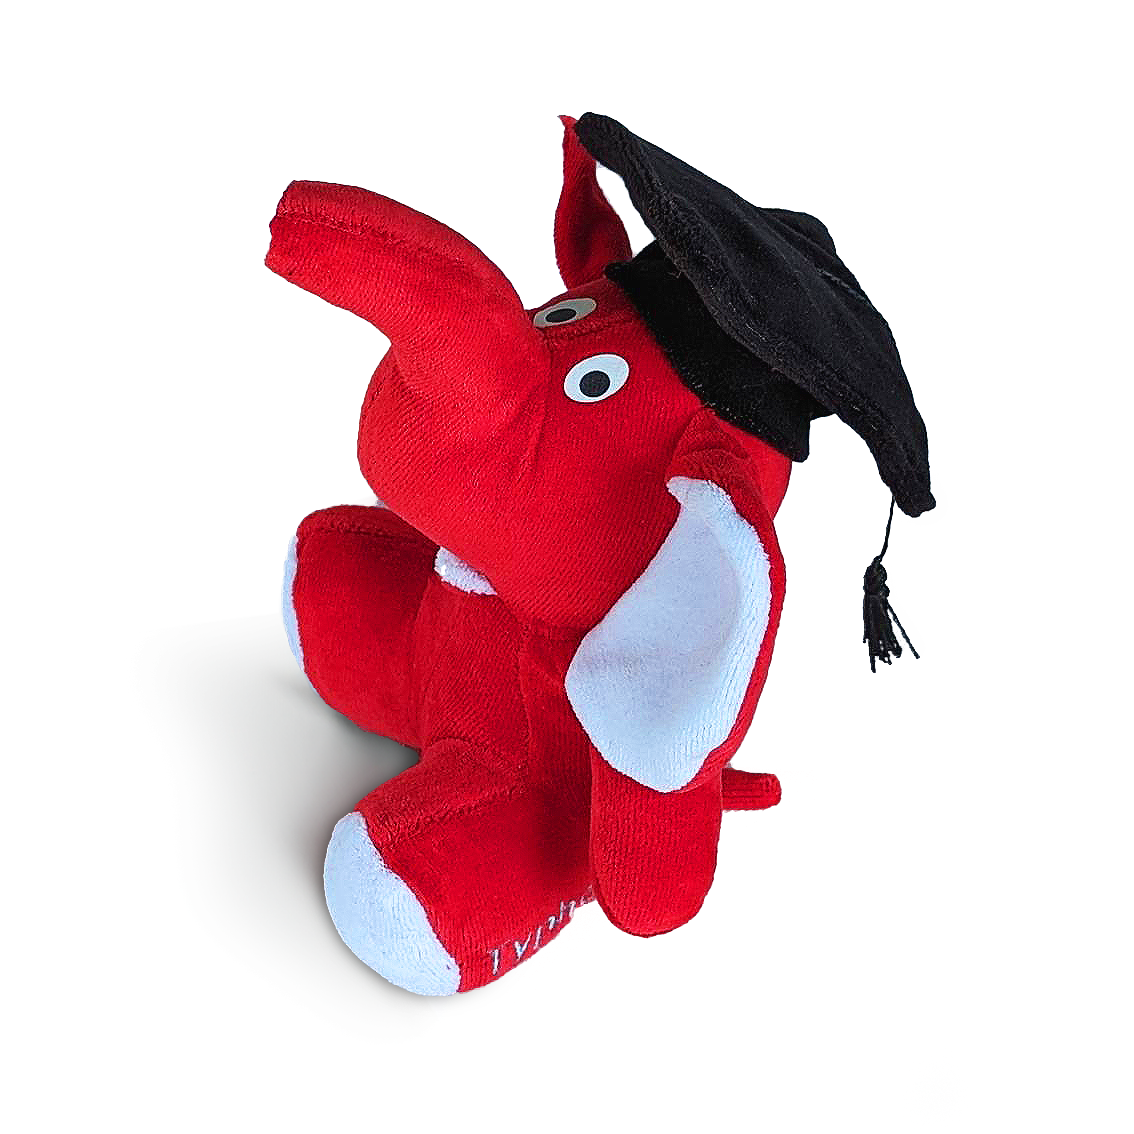 HIL Academy's mascot - a stuffed red elephant with a graduation cap.